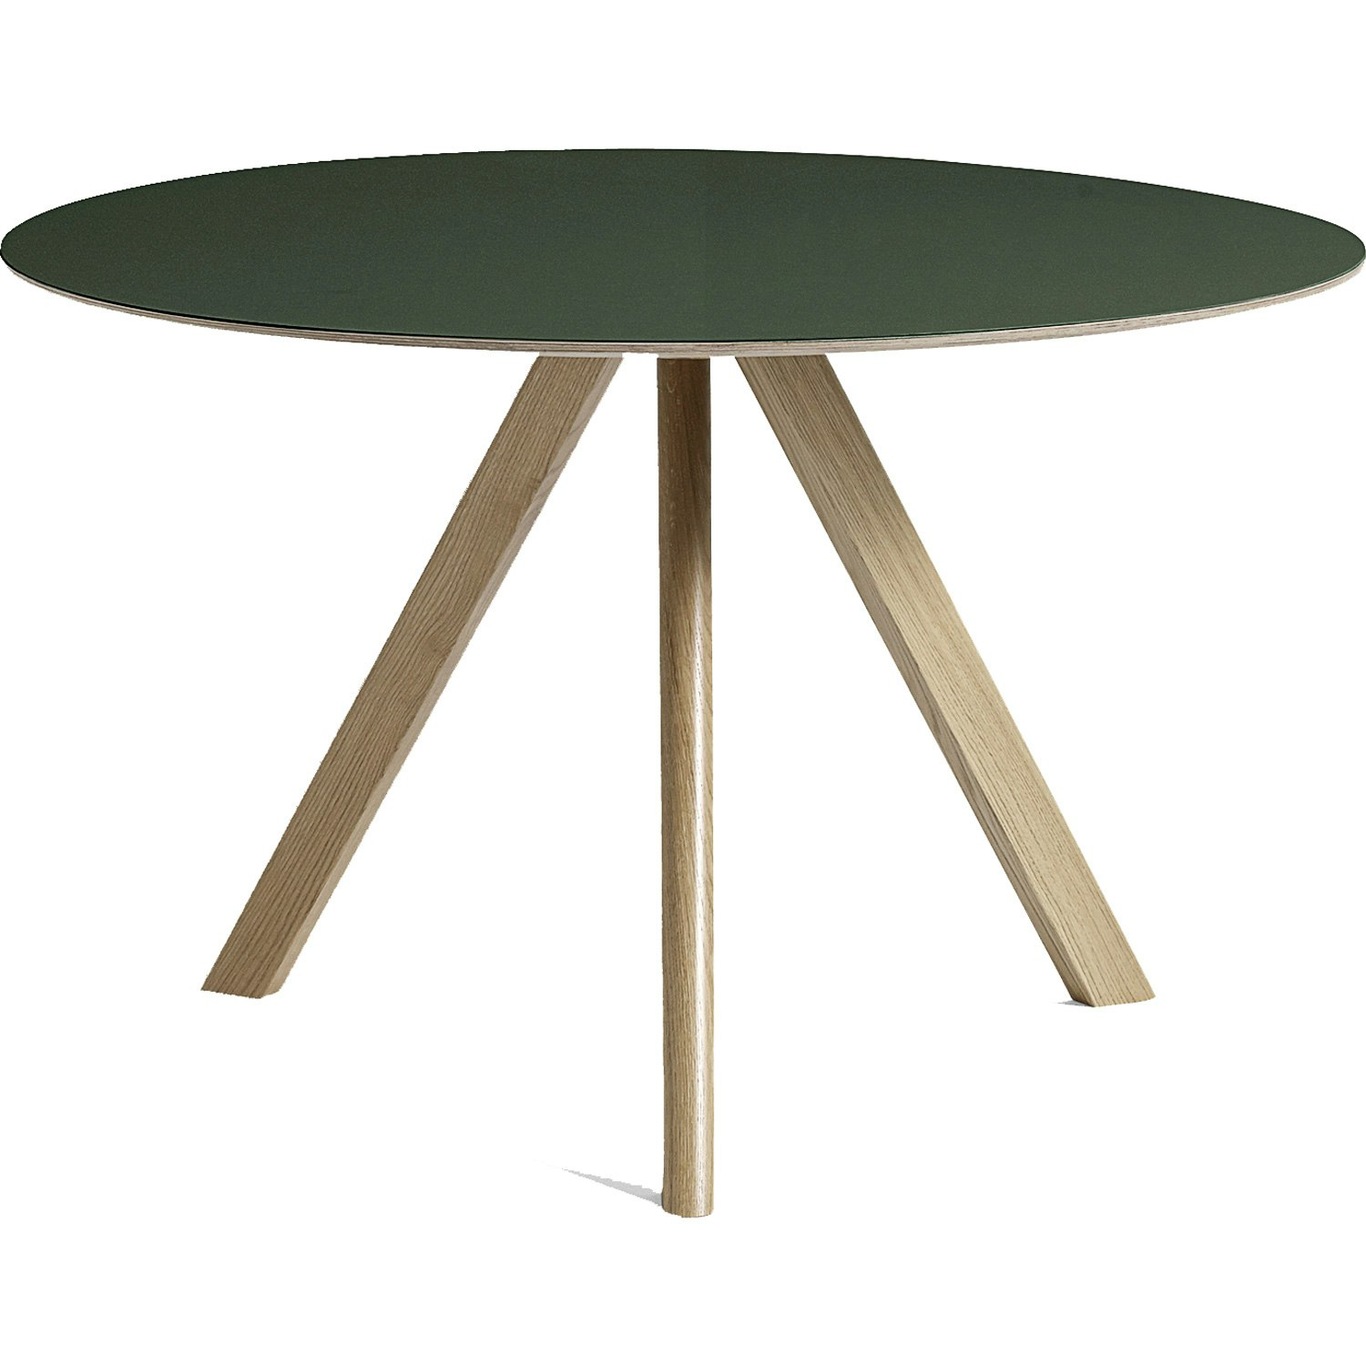 CPH 20 Table Ø120x74 cm, Water Based Lacquered Oak/Green Linoleum